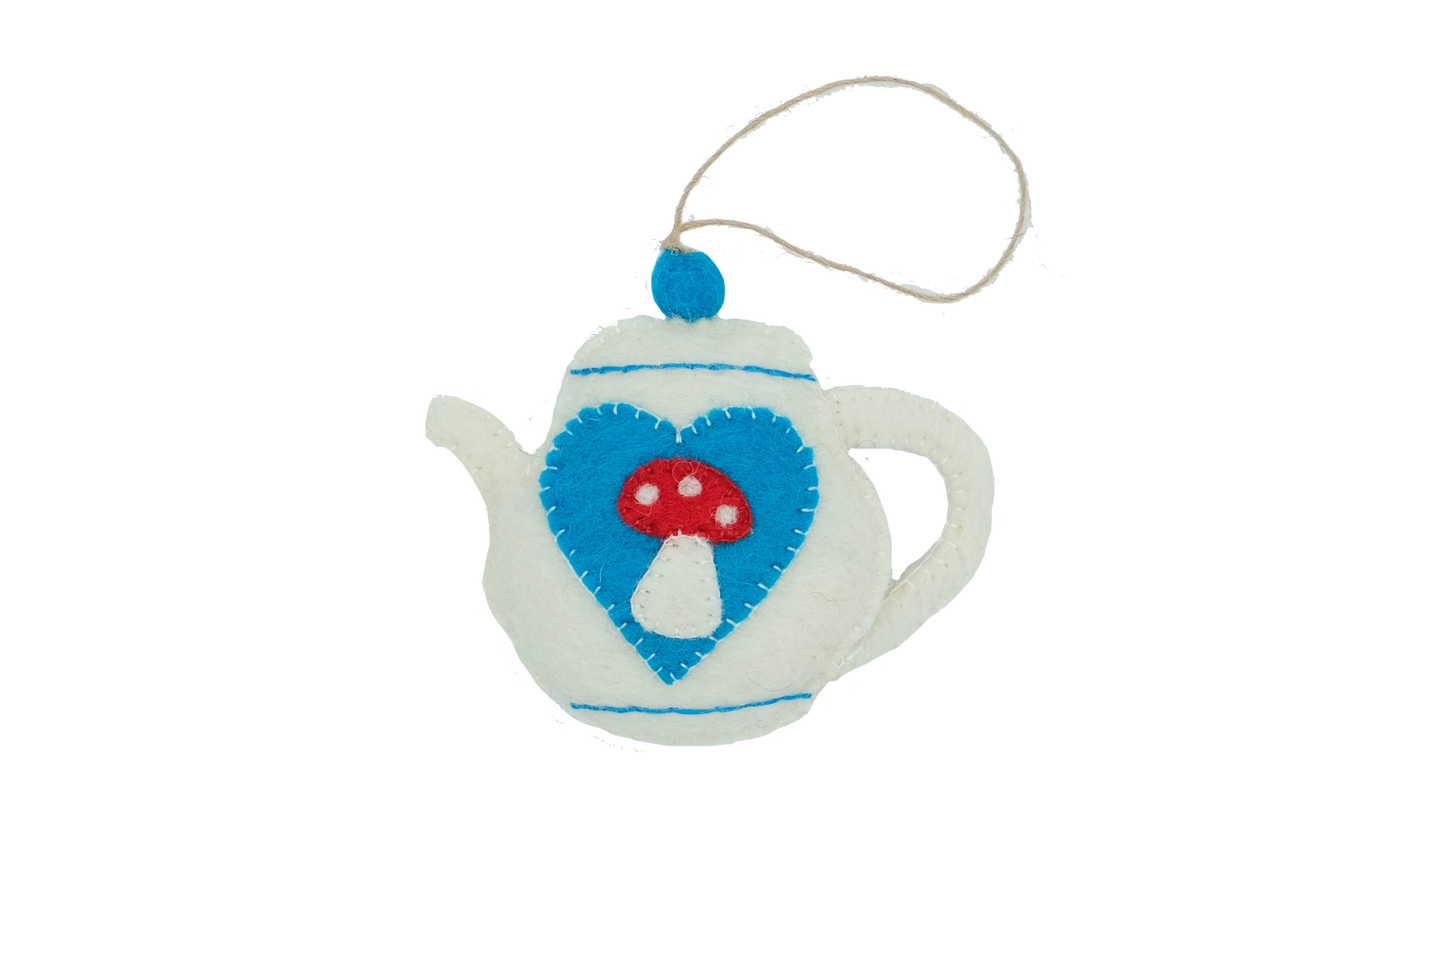 This Global Groove Life, handmade, ethical, fair trade, eco-friendly, sustainable, felt, teapot ornament with red mushroom and blue heart motif, was created by artisans in Kathmandu Nepal and will be a beautiful addition to your Christmas tree this holiday season.